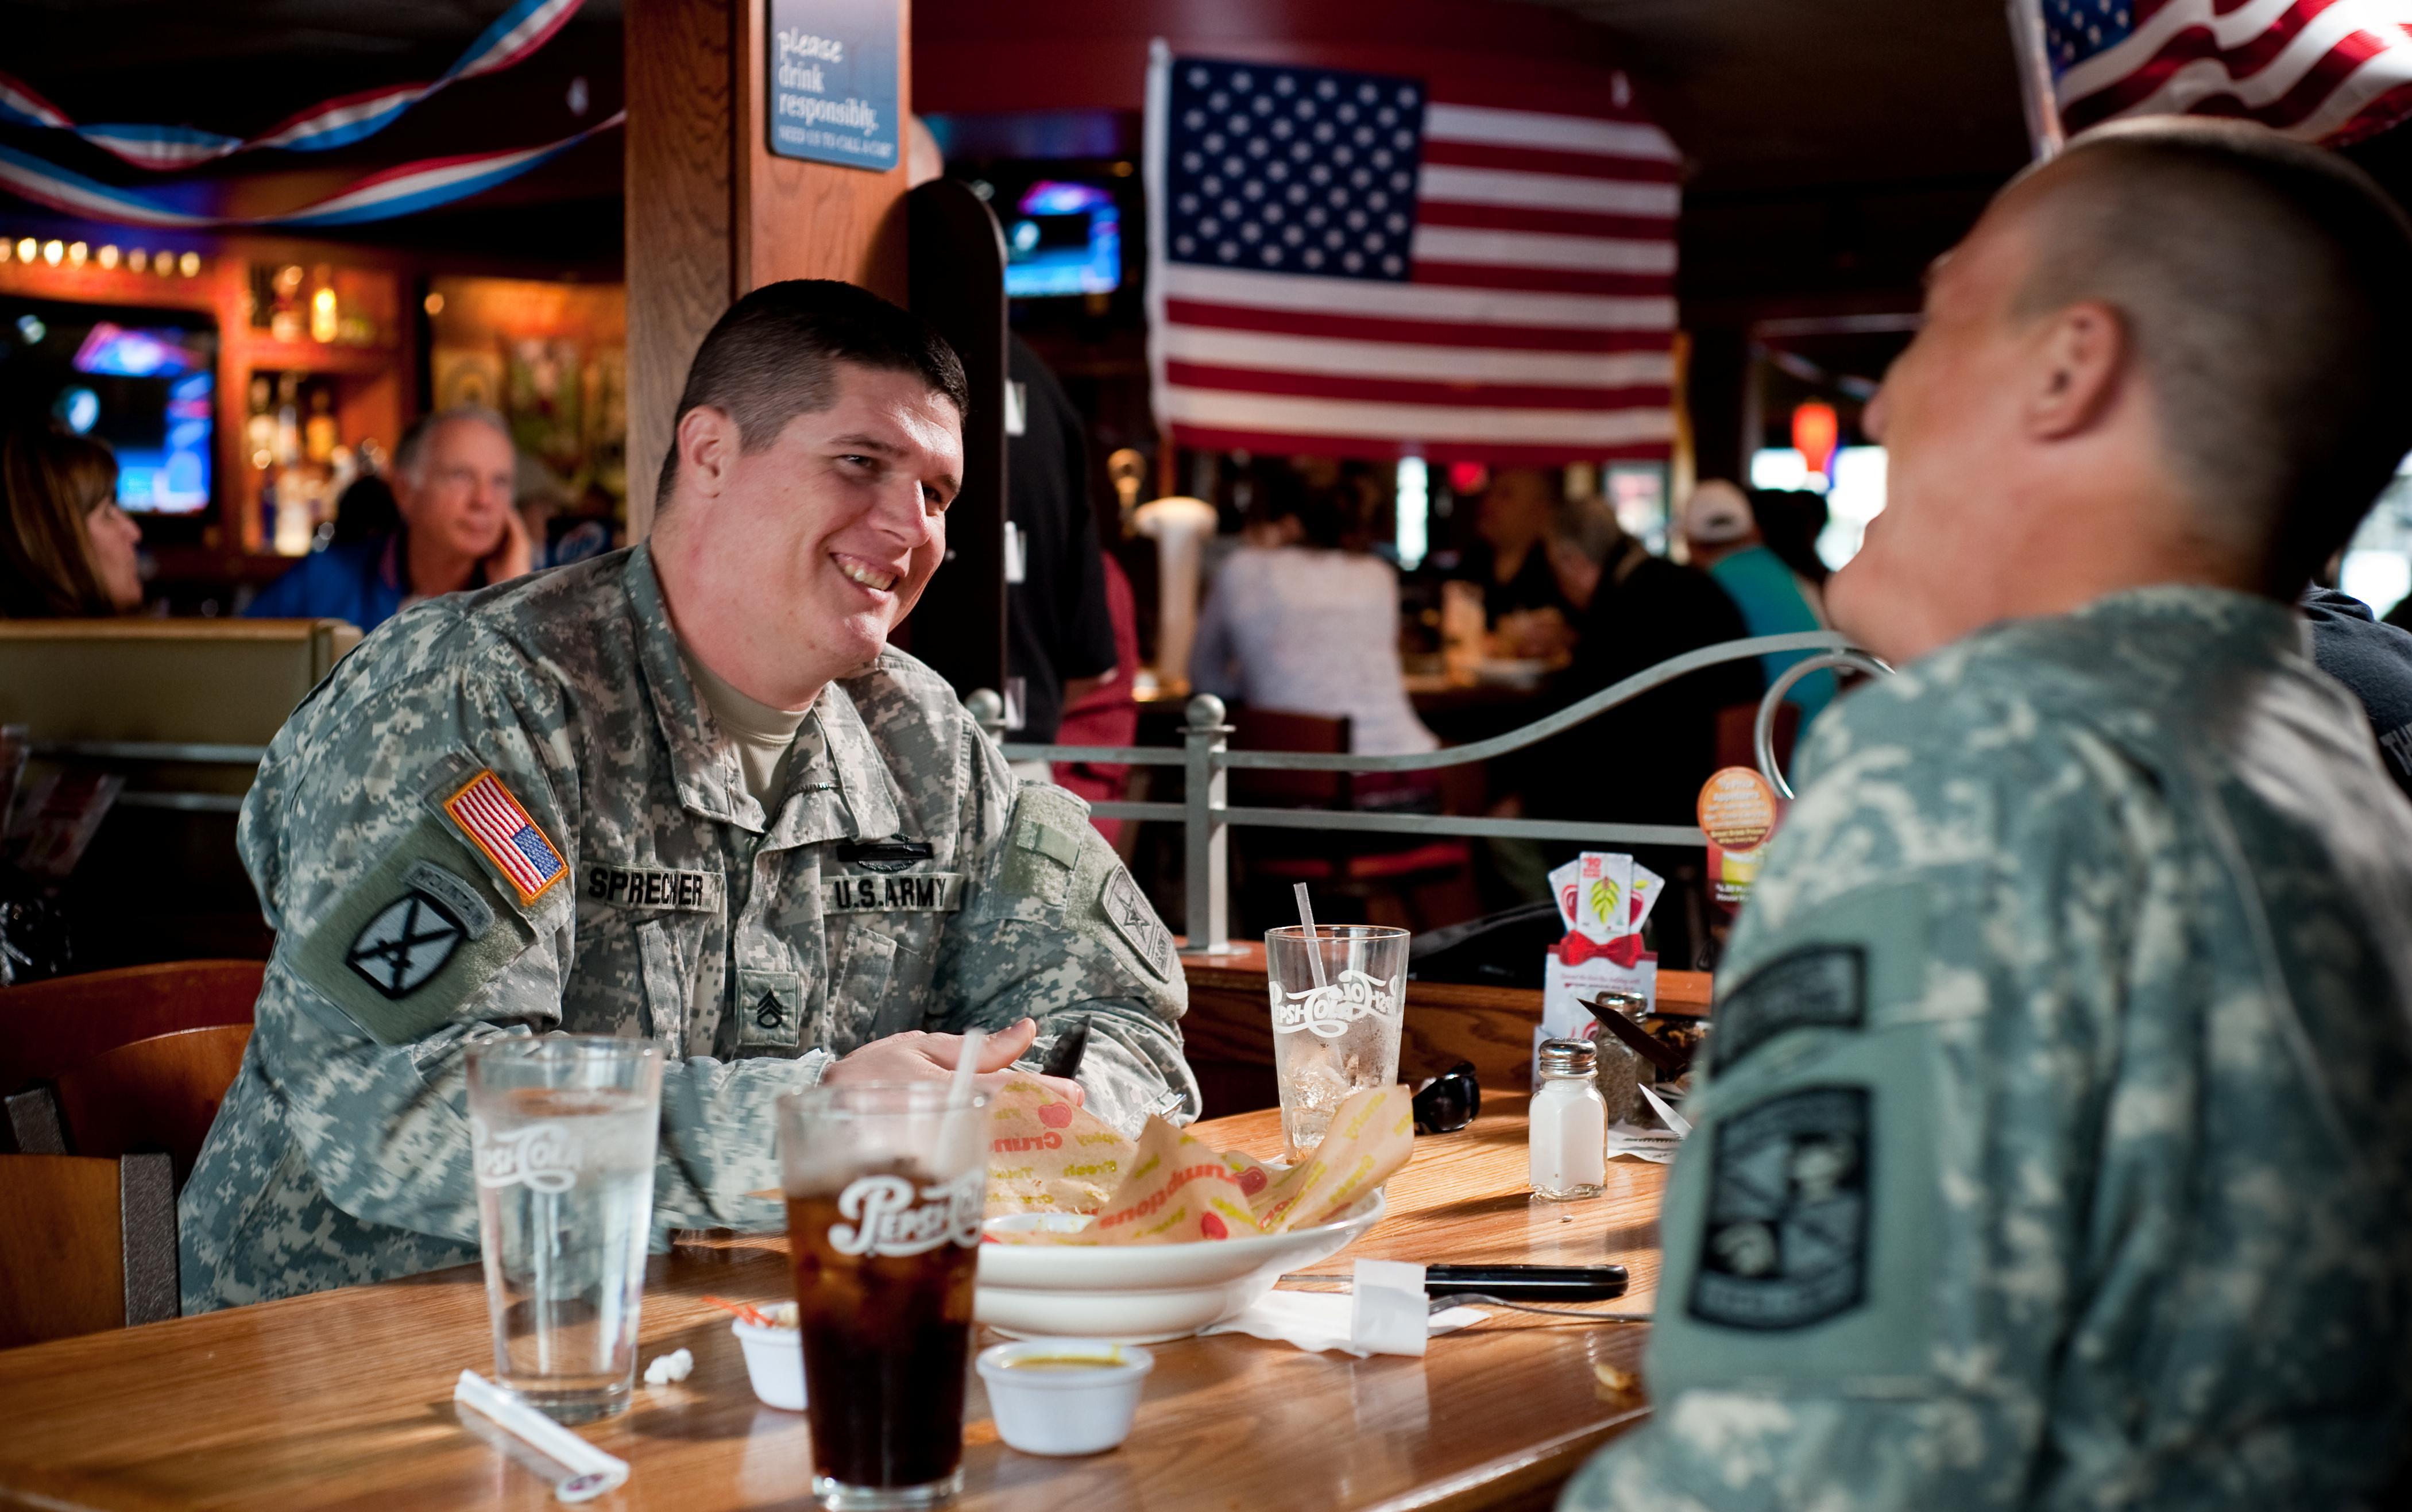 Applebee’s Says Thank You to Servicemembers with Complimentary Meals on